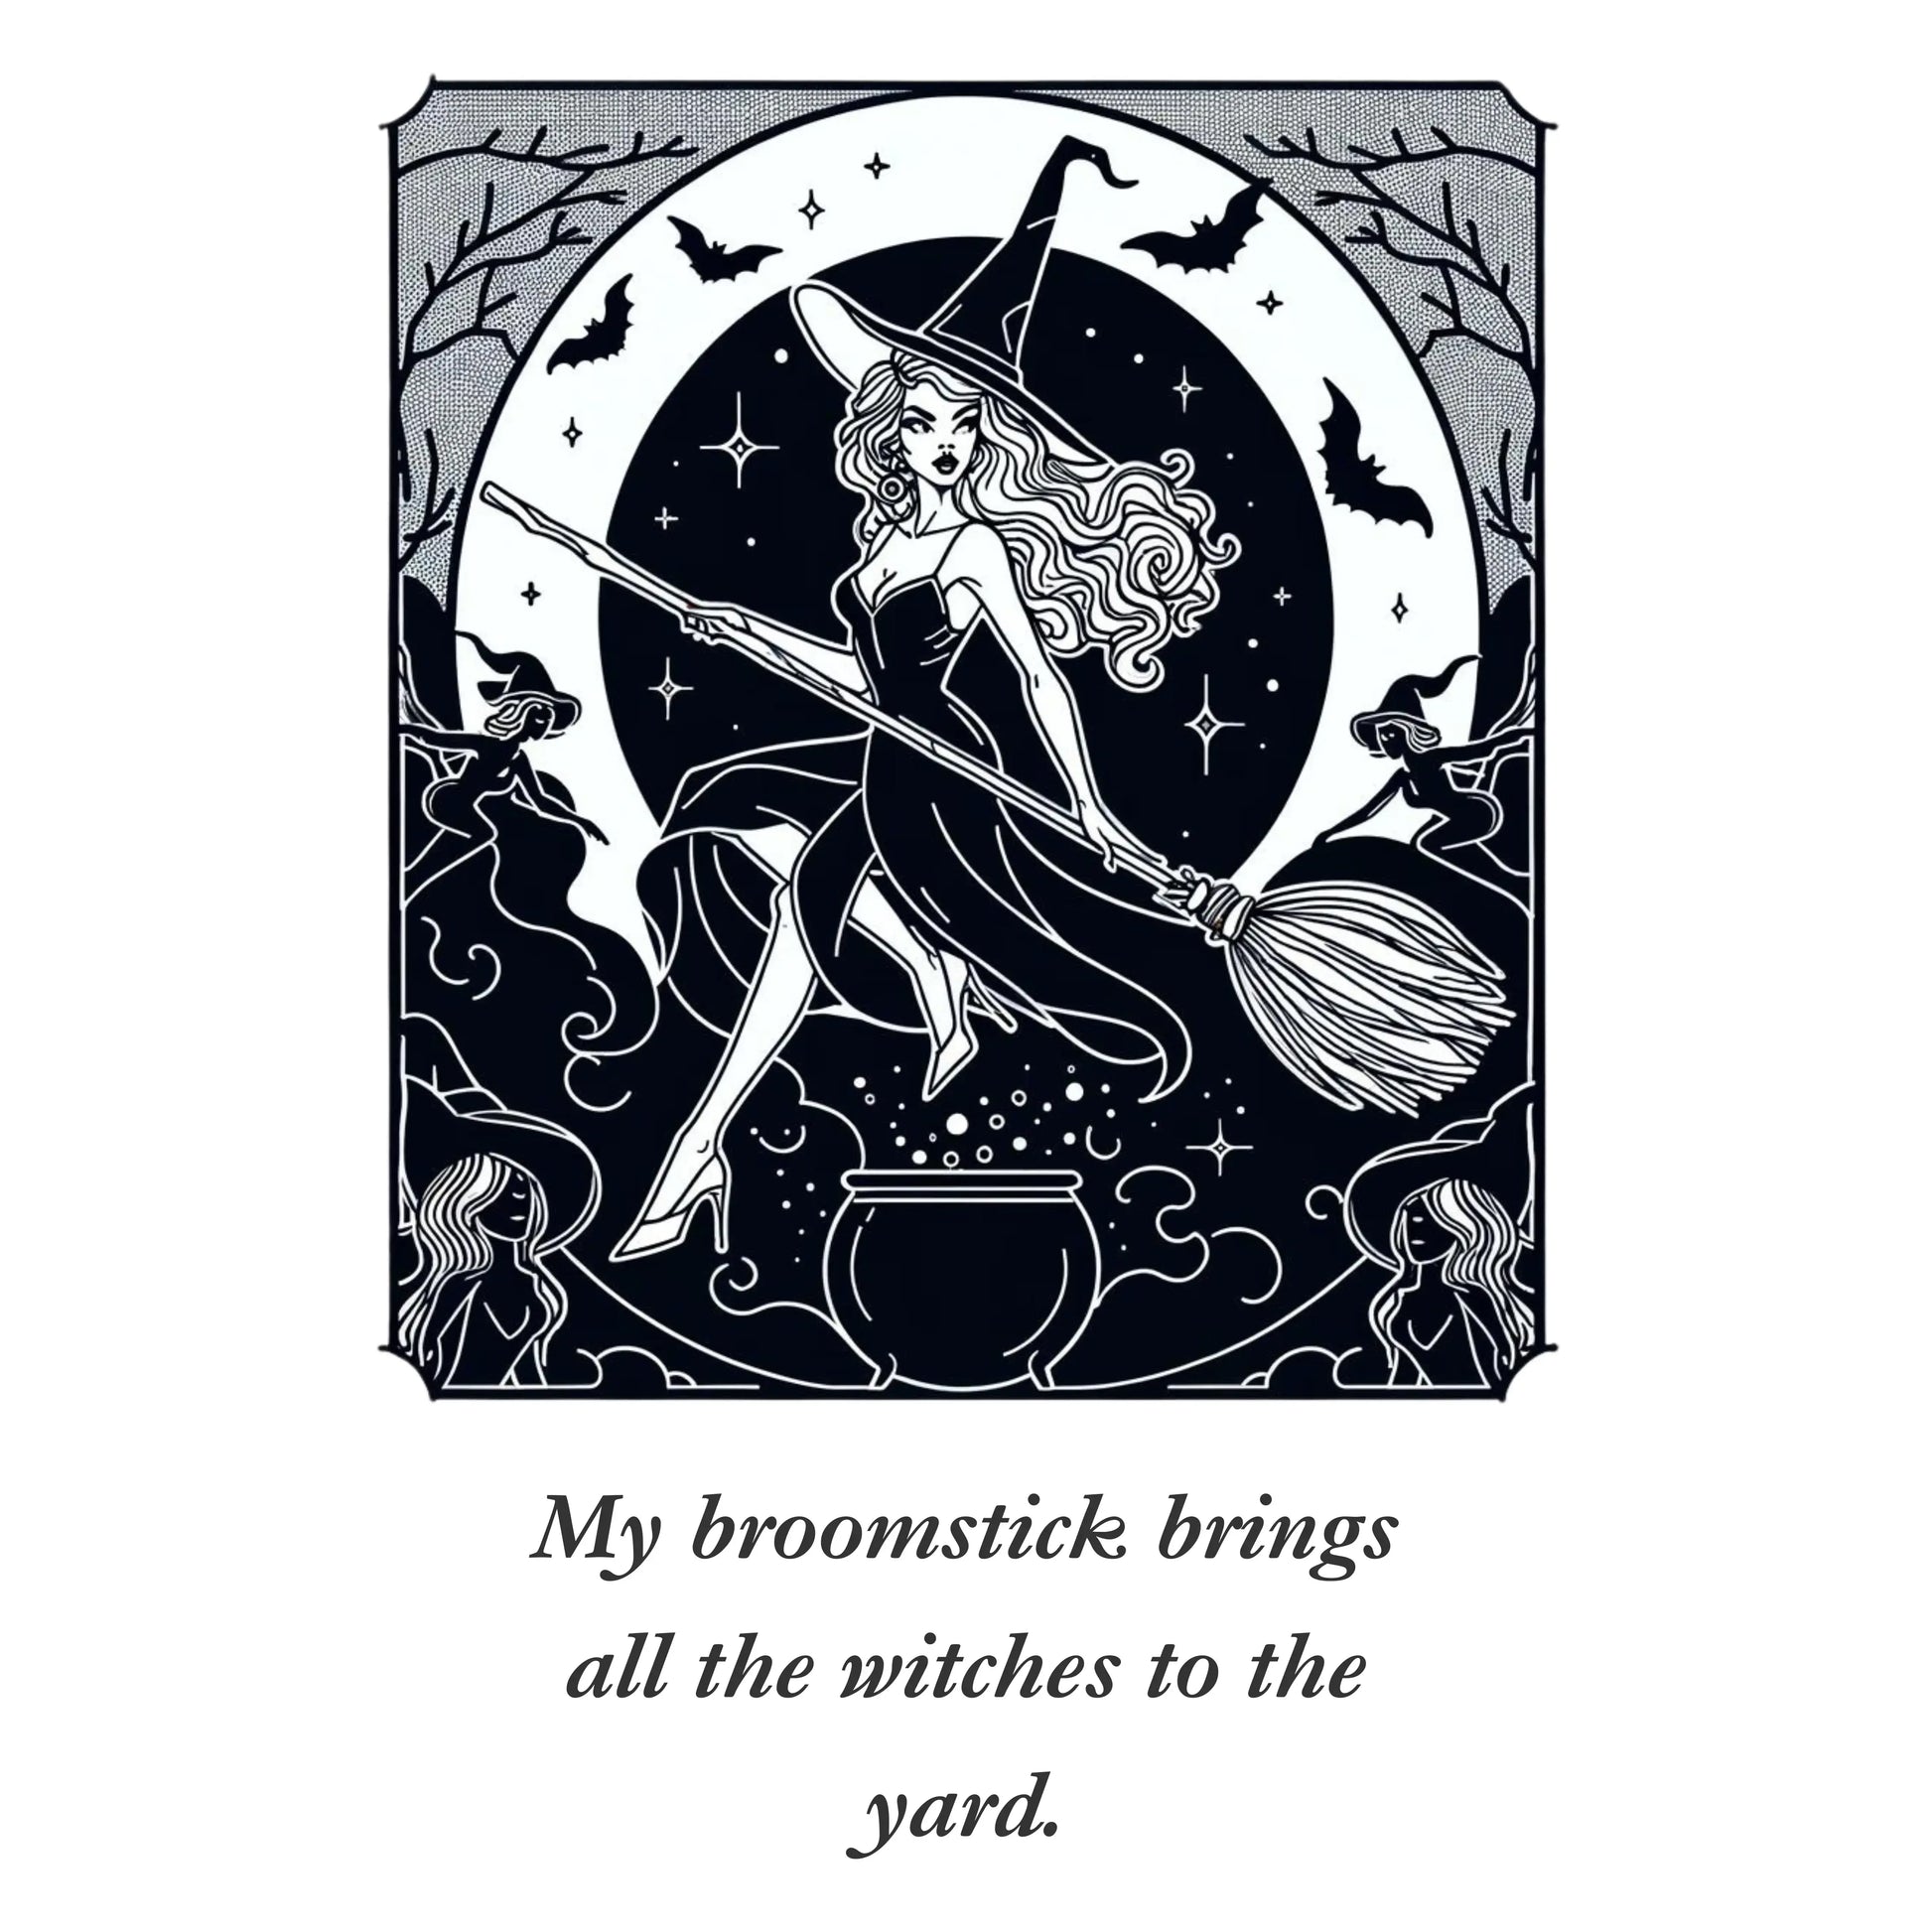 My broomstick brings all the witches to the yard, graphic design from Blk Moon shop.